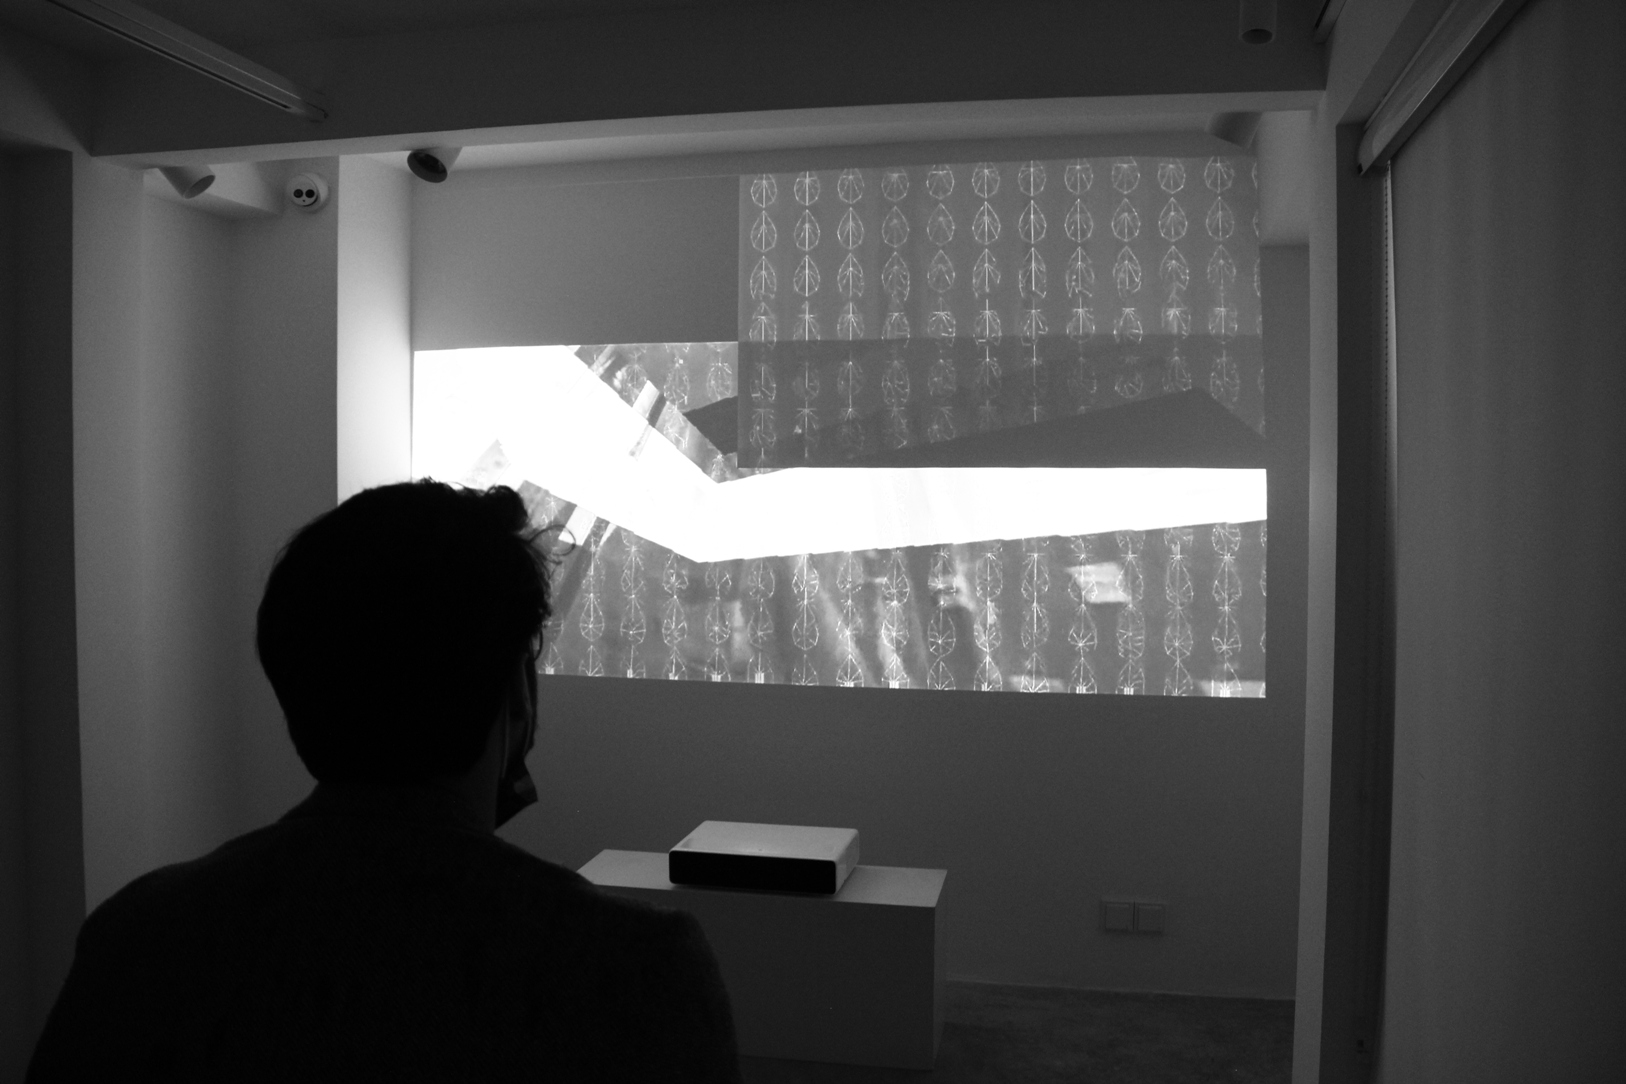 Humans Like Raindrops: Glitch Video Art by Sadeq Majlesipour